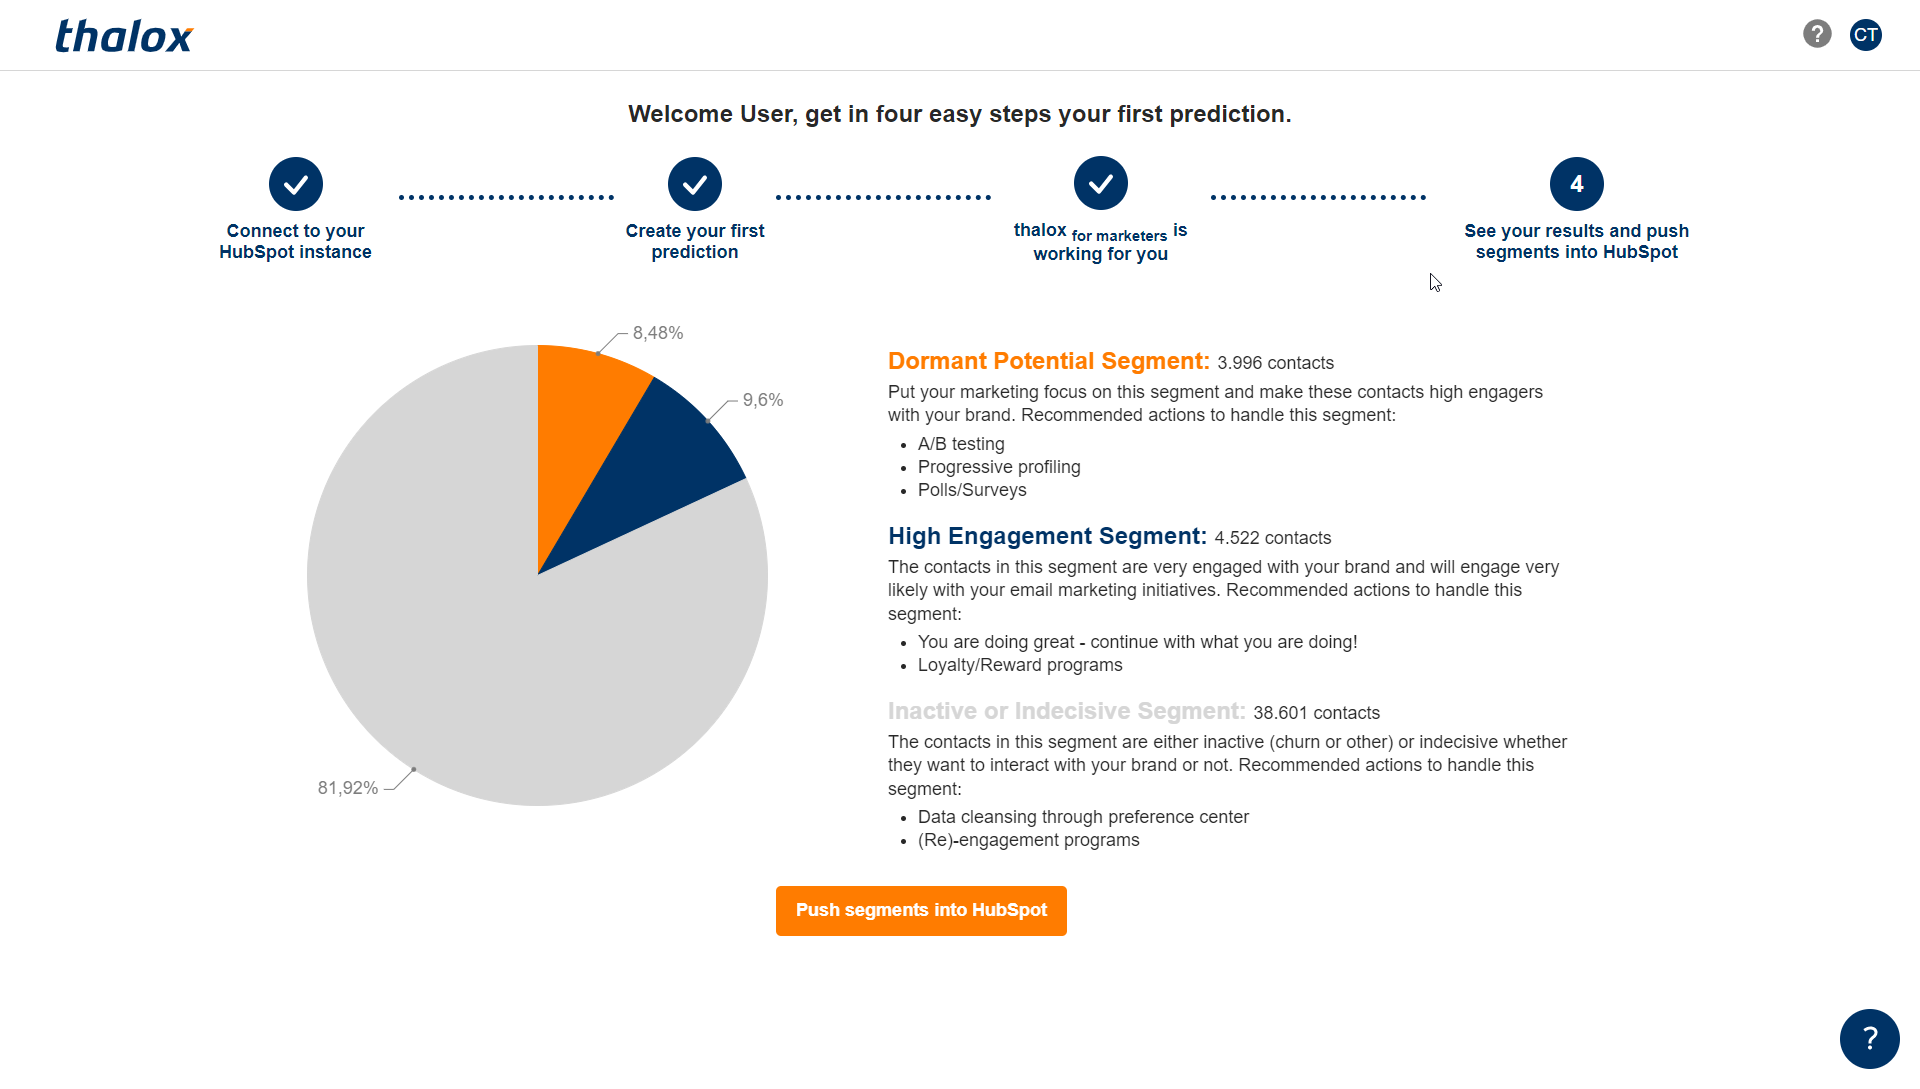 Step 3: Get your engagement segments